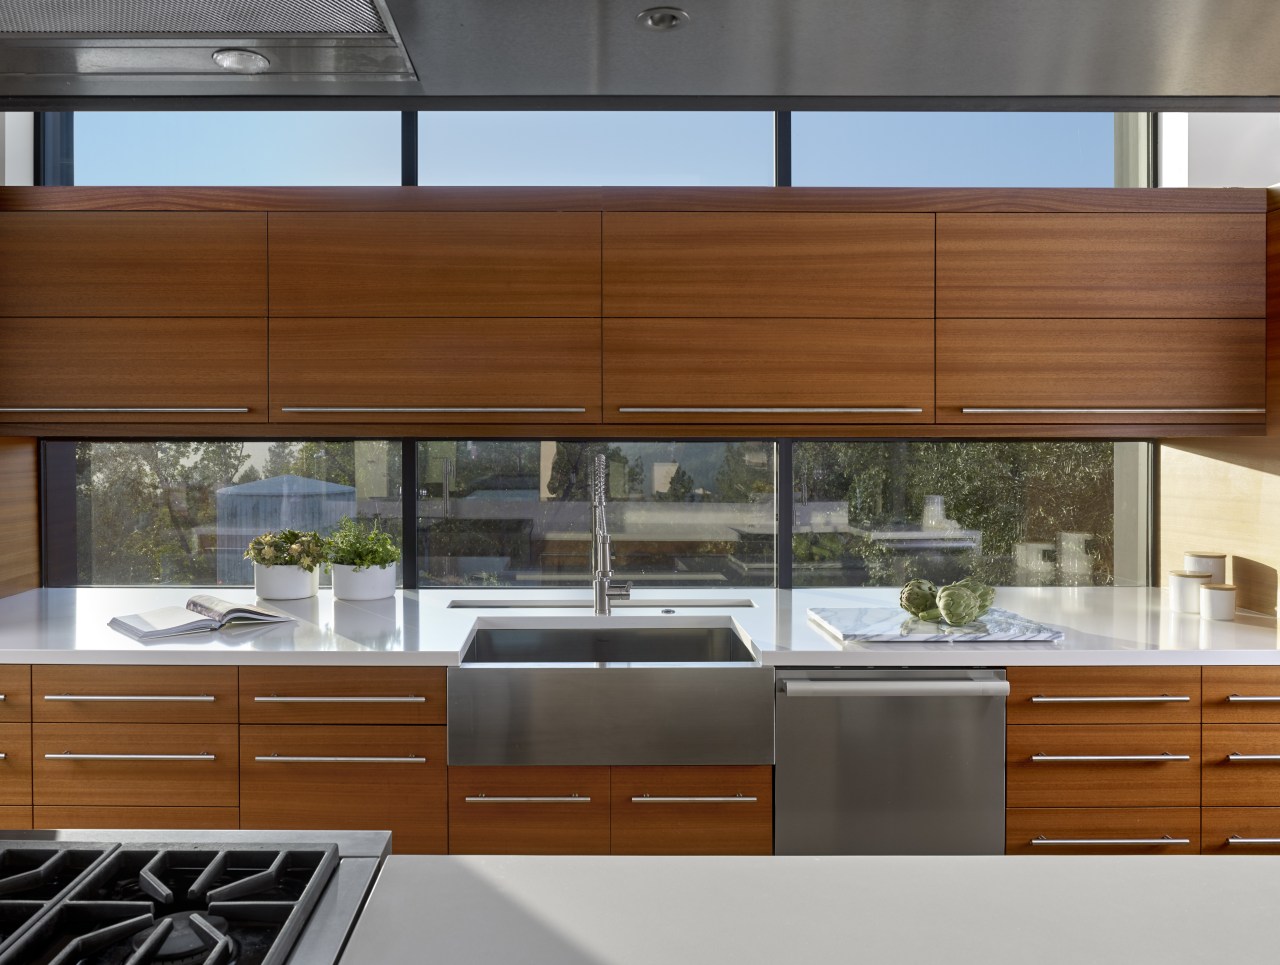 Cabinetry in this kitchen is in a richly architecture, cabinetry, countertop, benchtop, cabinetry, design, home, house, kitchen, wood, engineered quartz, butler sink, stainless steel, de Vito Architecture + design